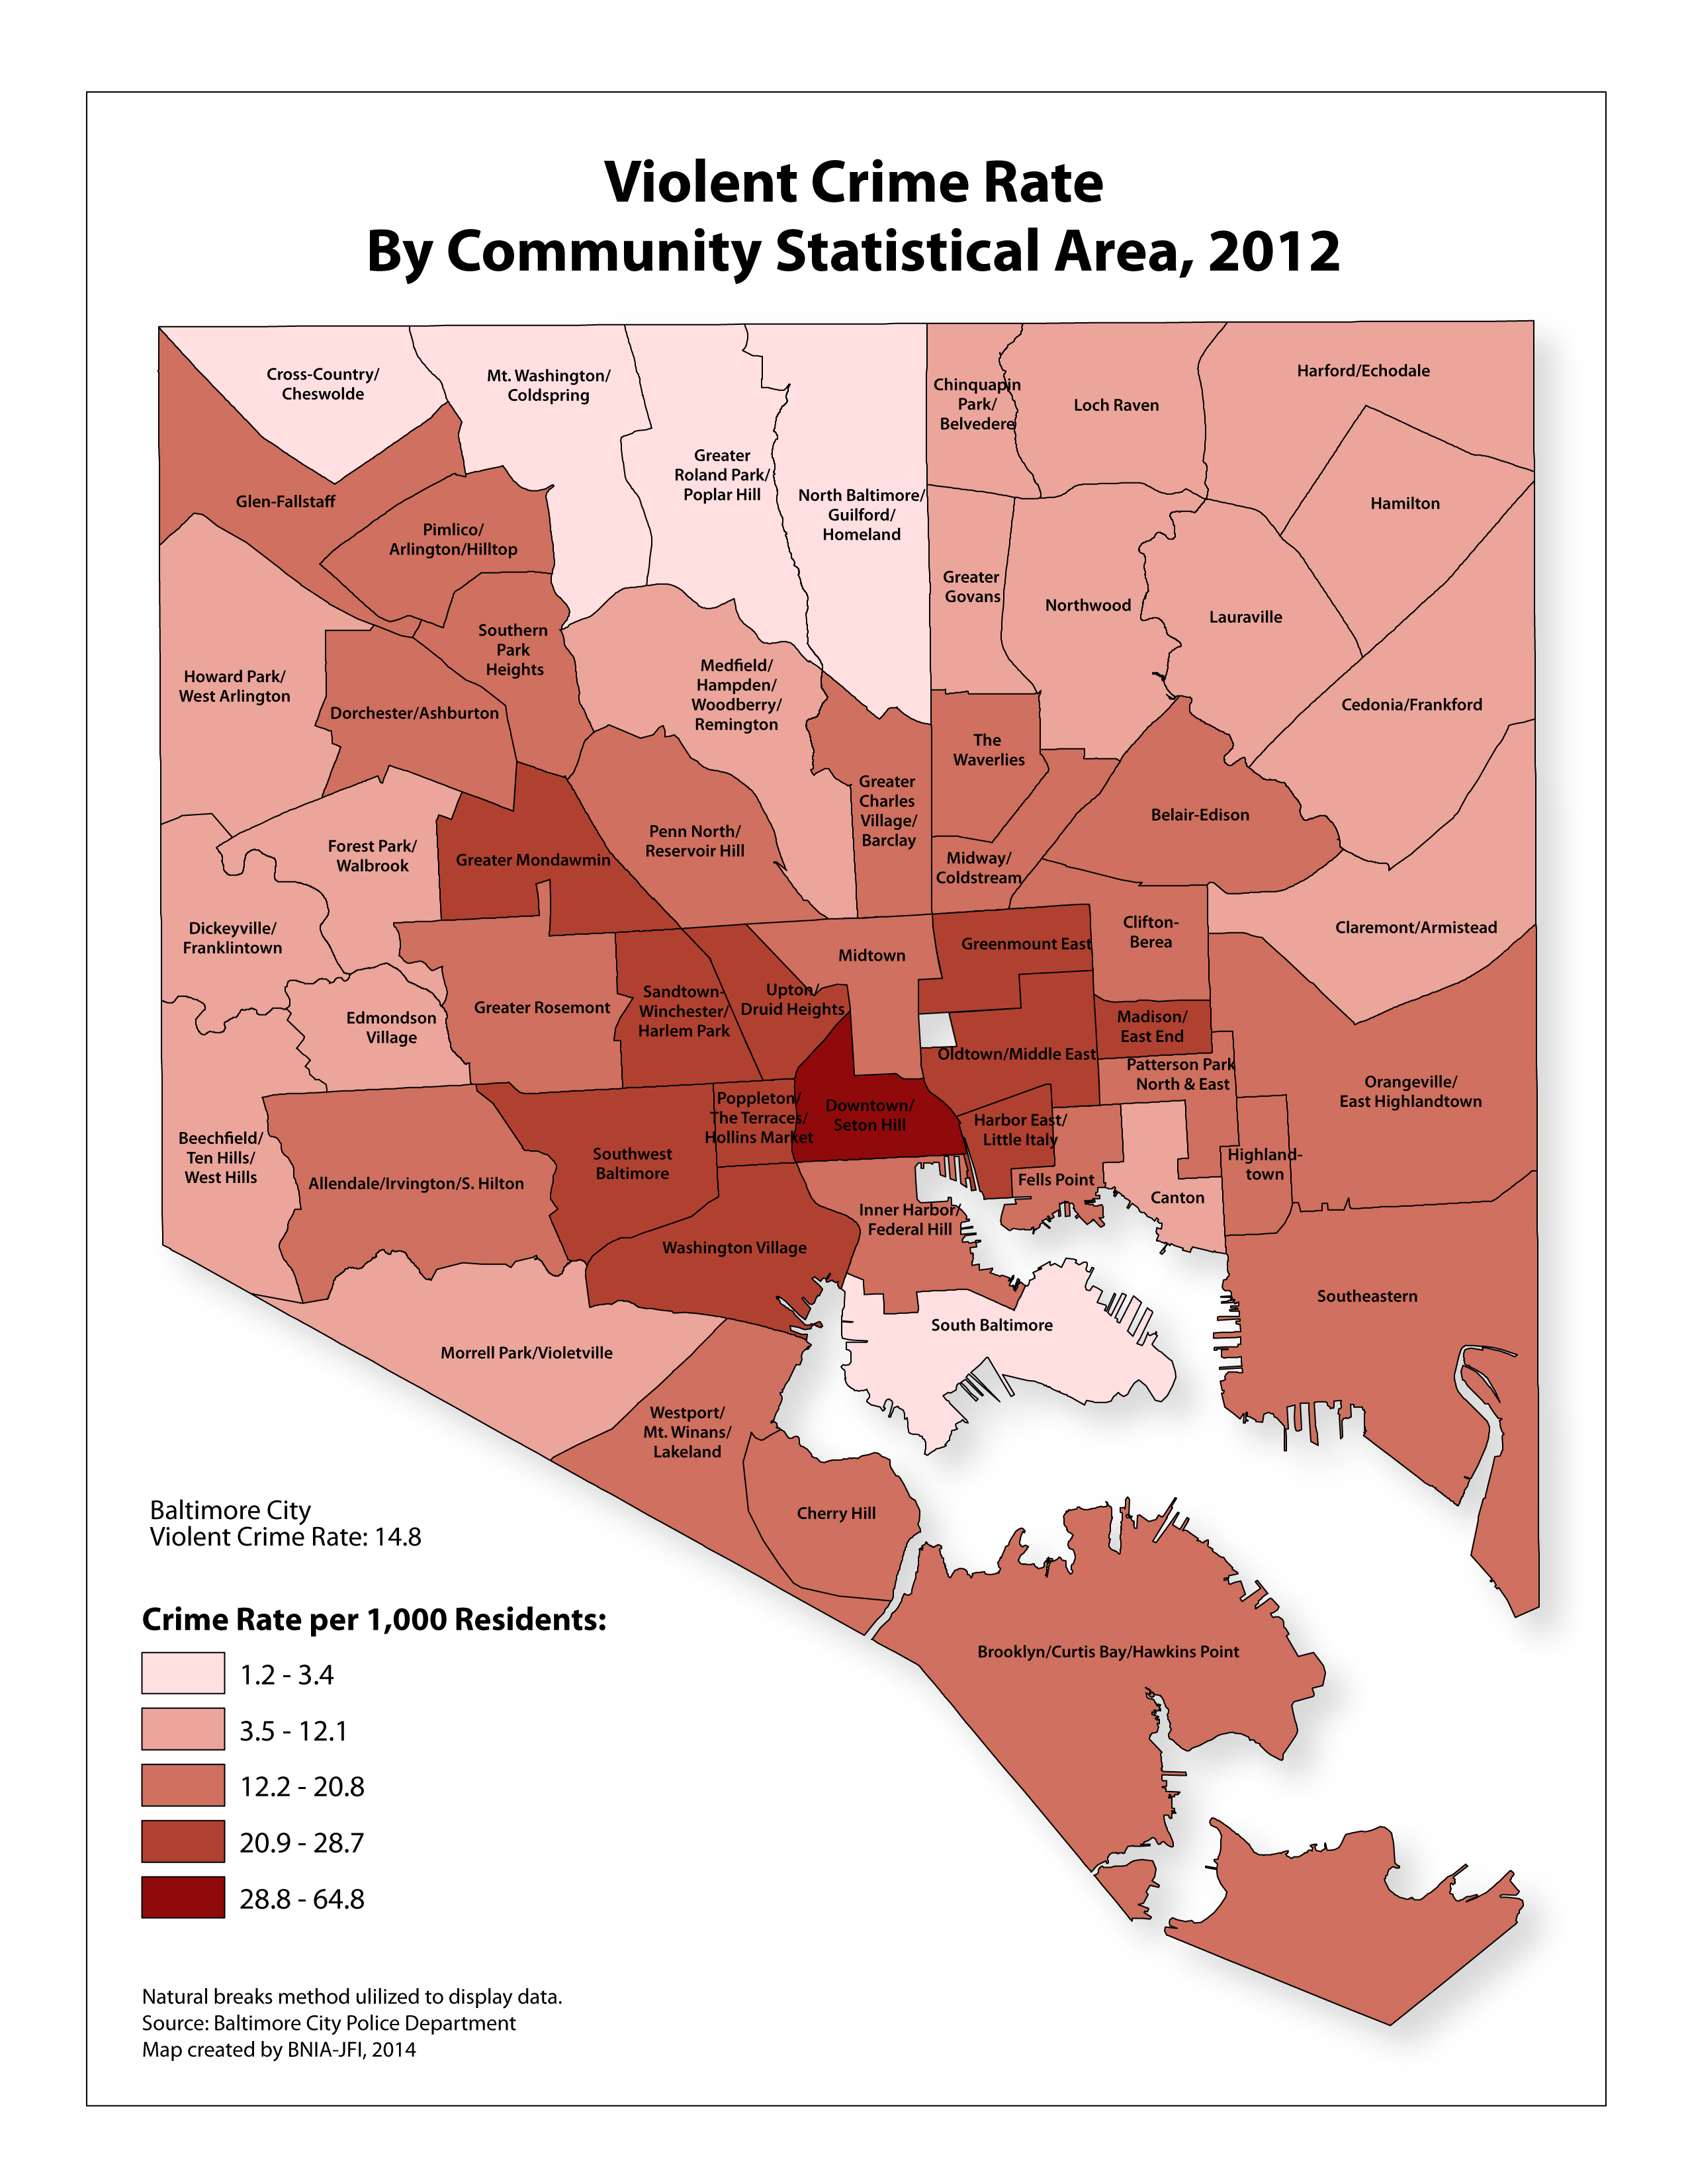 Gallery Vital Signs 12 Crime And Safety Maps Bnia Baltimore Neighborhood Indicators Alliance